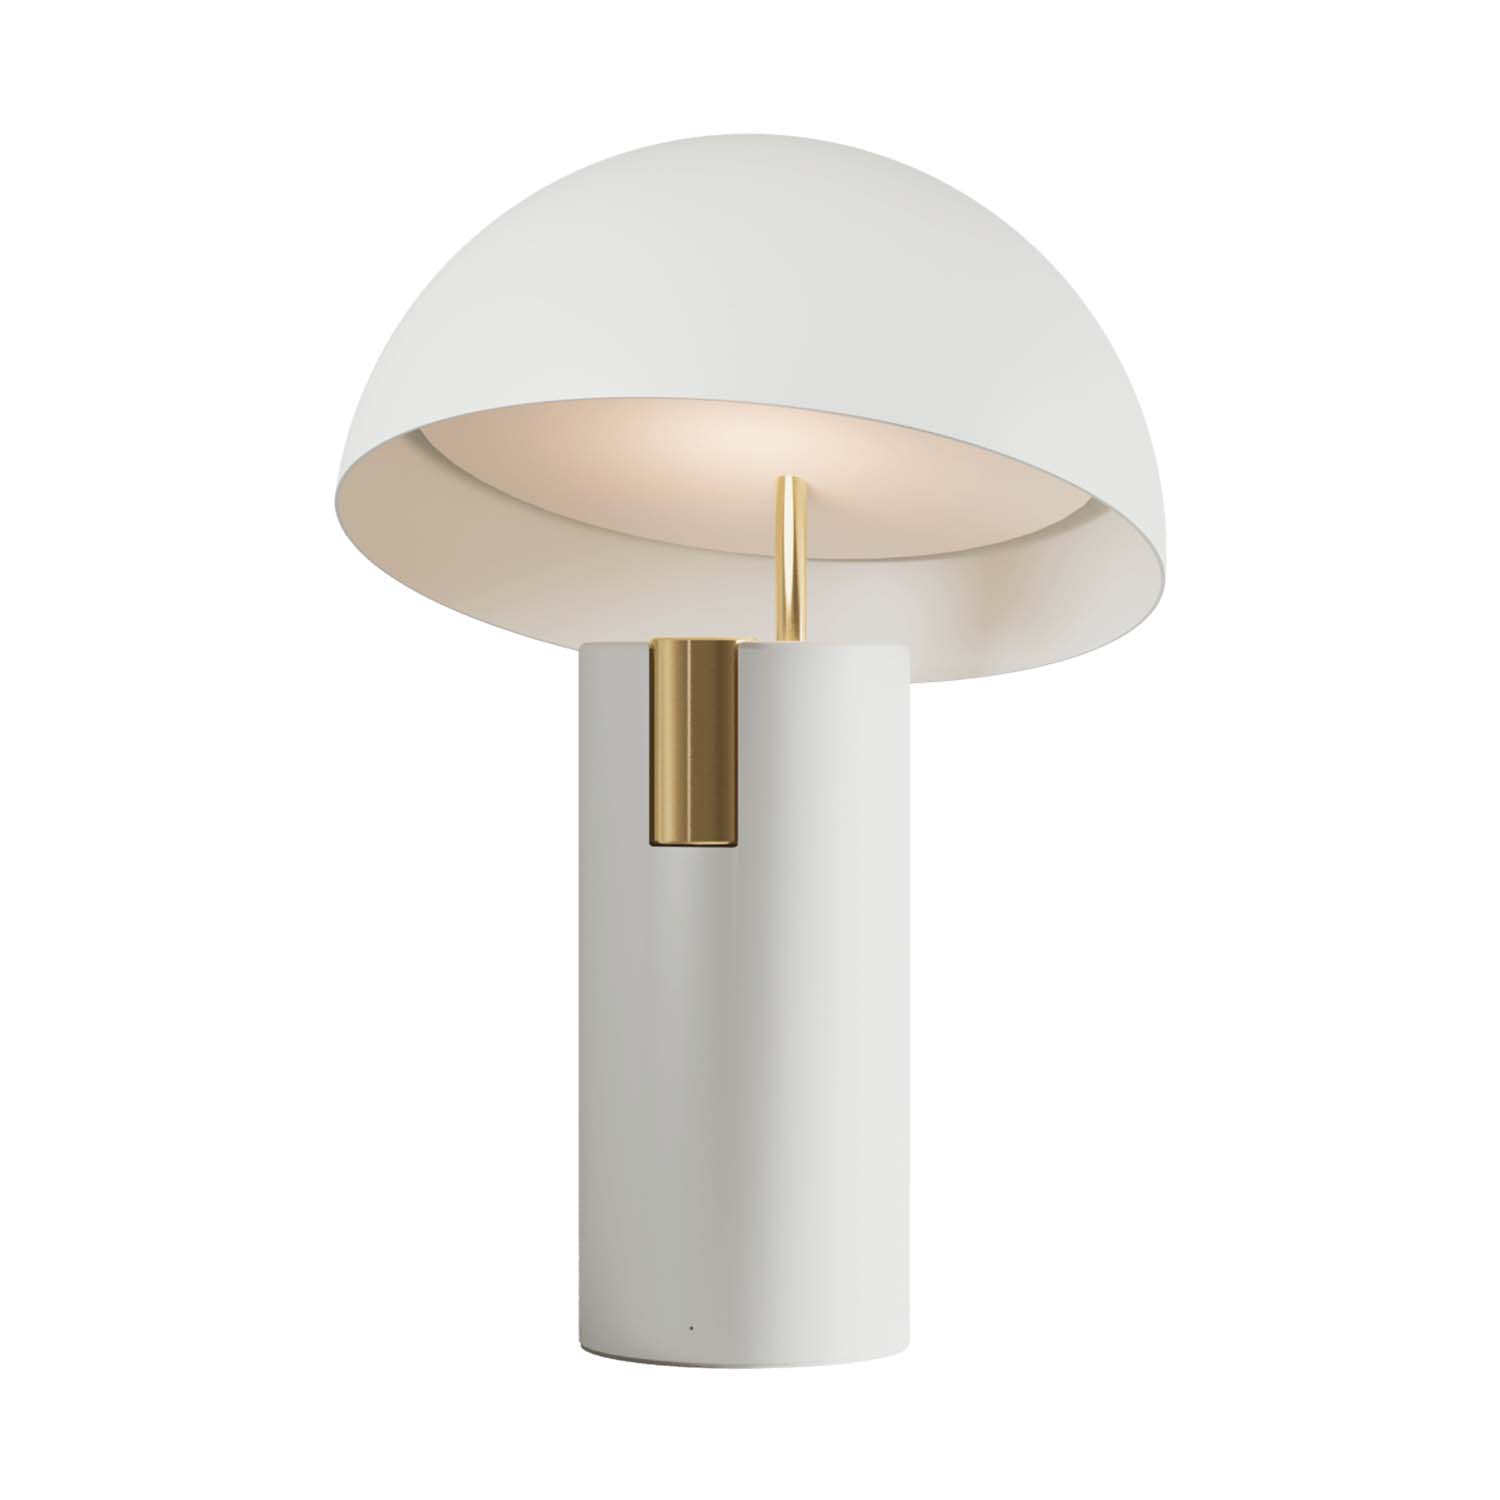 ALTO - Connected lamp for modern living room